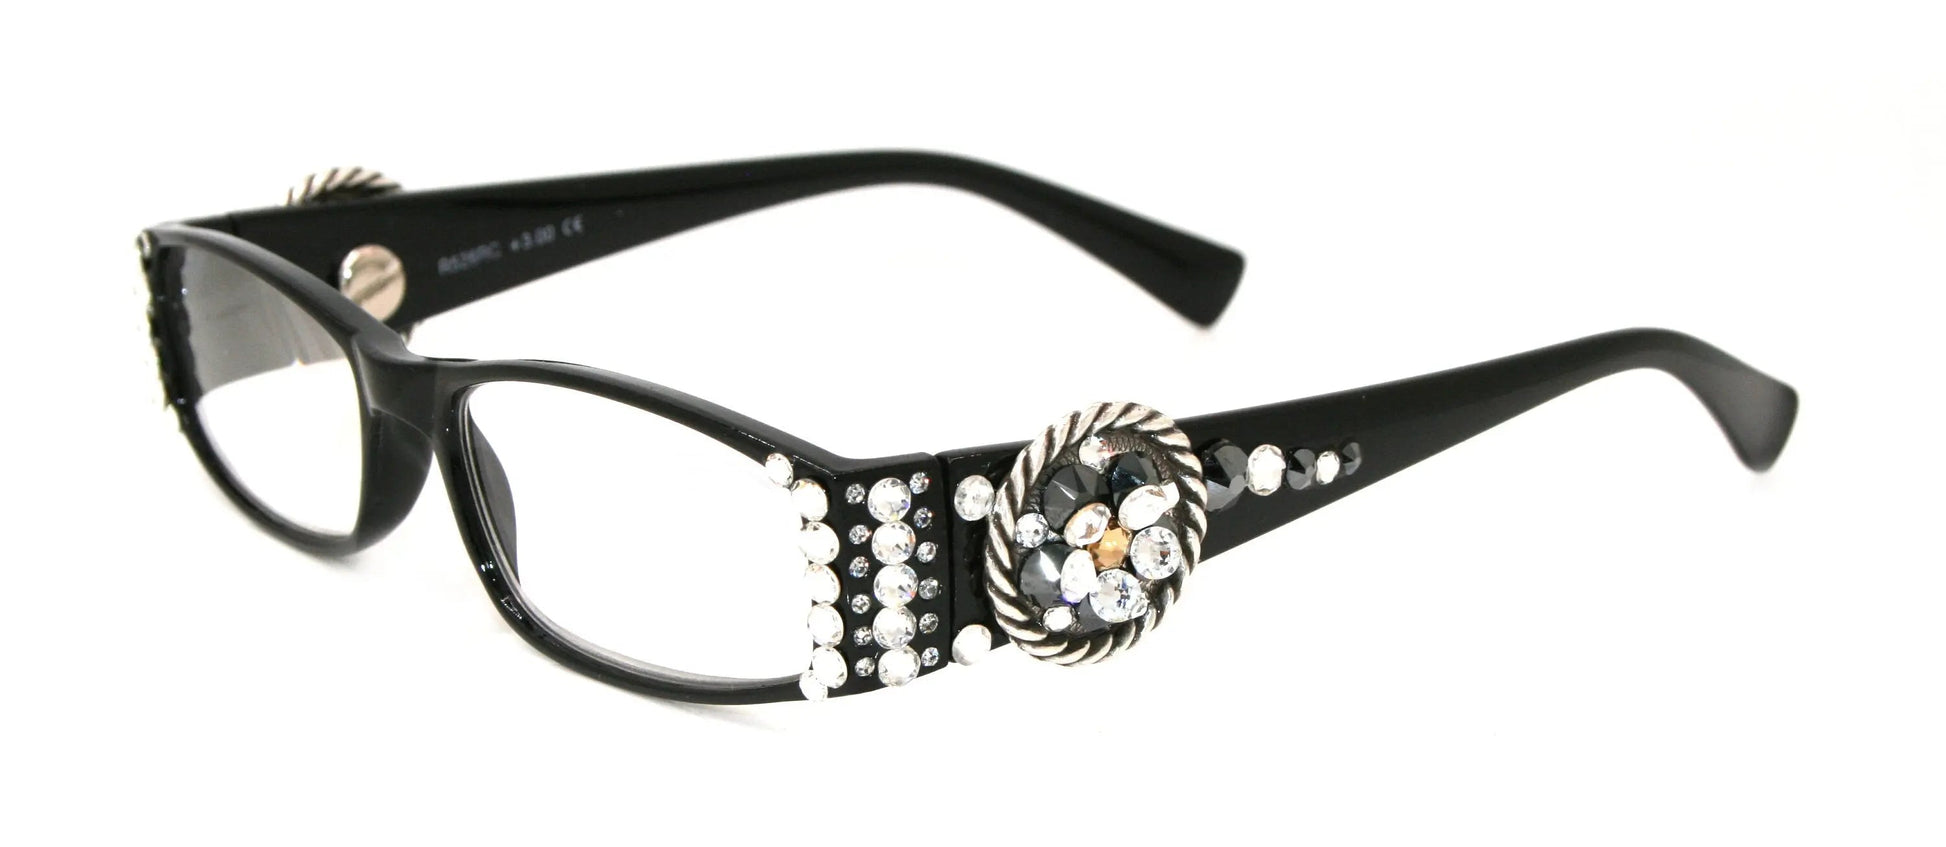 The Medallion, (Bling) Women Reading Glasses Adorned W (Clear, Hematite) Genuine European Crystals (Black) Rope Edge Concho, NY Fifth Avenue 